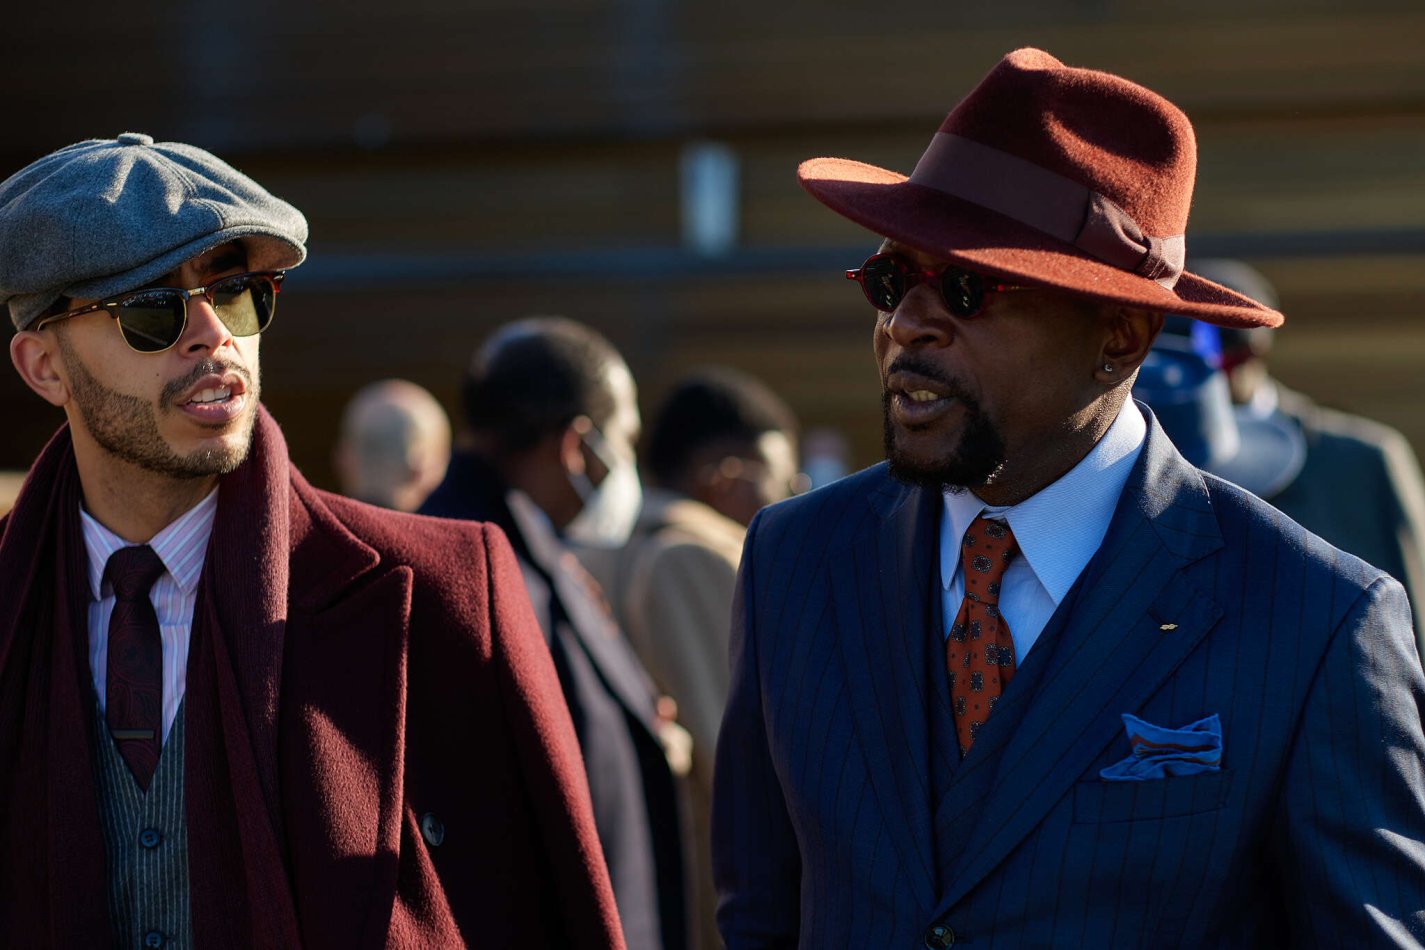 101 Pitti Immagine Uomo, the street photos from the event in Florence